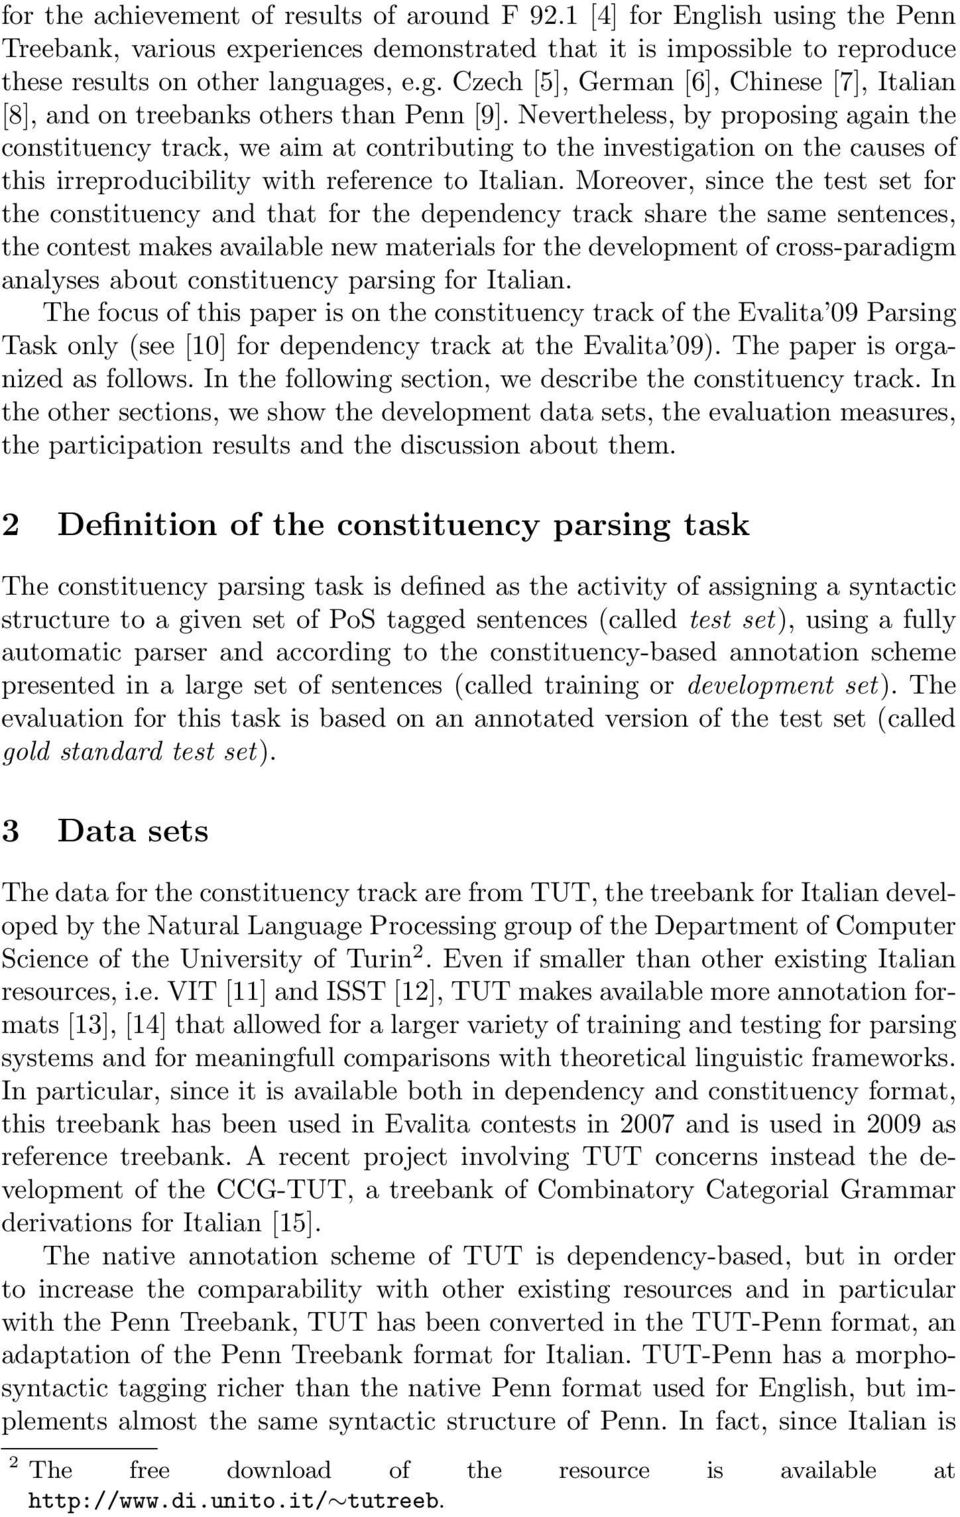 Moreover, since the test set for the constituency and that for the dependency track share the same sentences, the contest makes available new materials for the development of cross-paradigm analyses